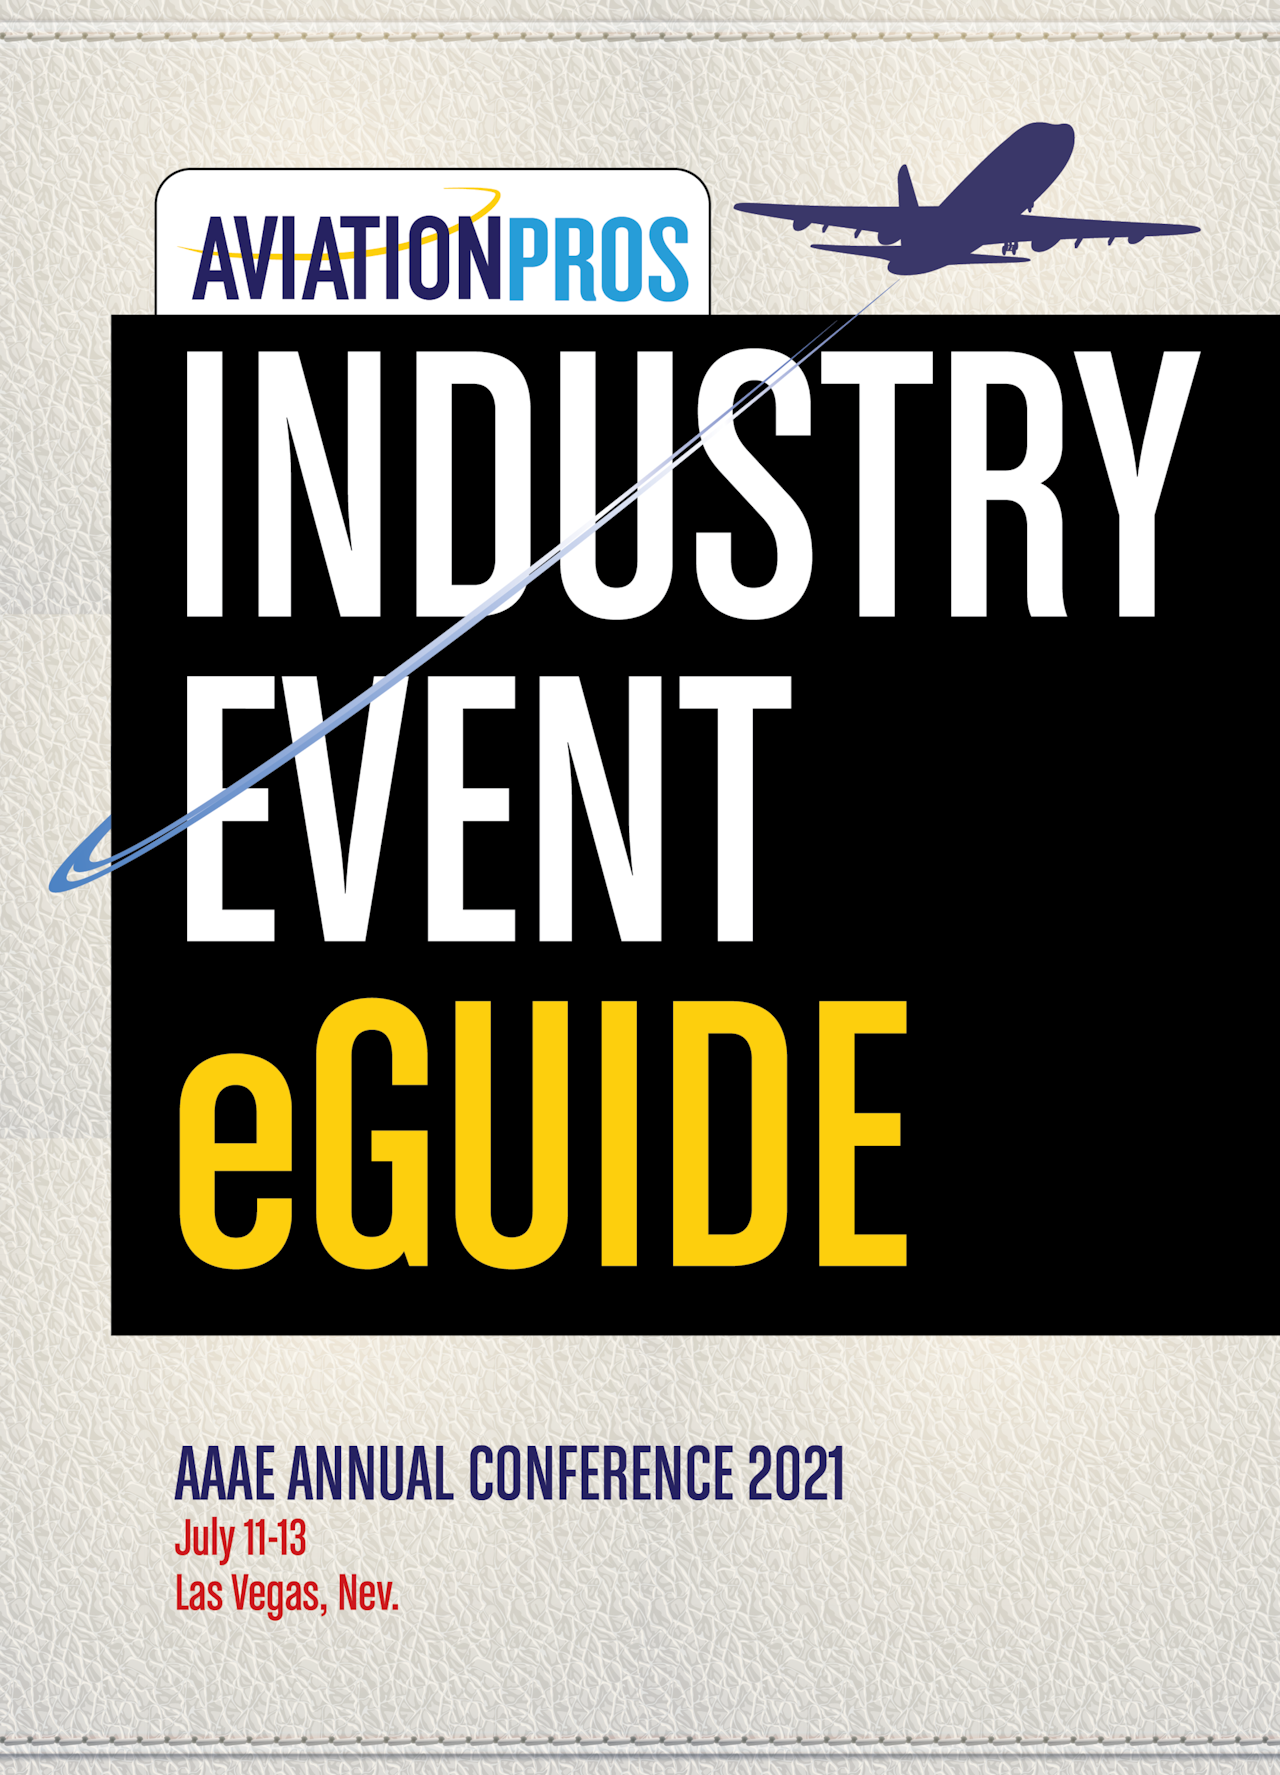 AAAE Annual Conference 2021 Aviation Pros